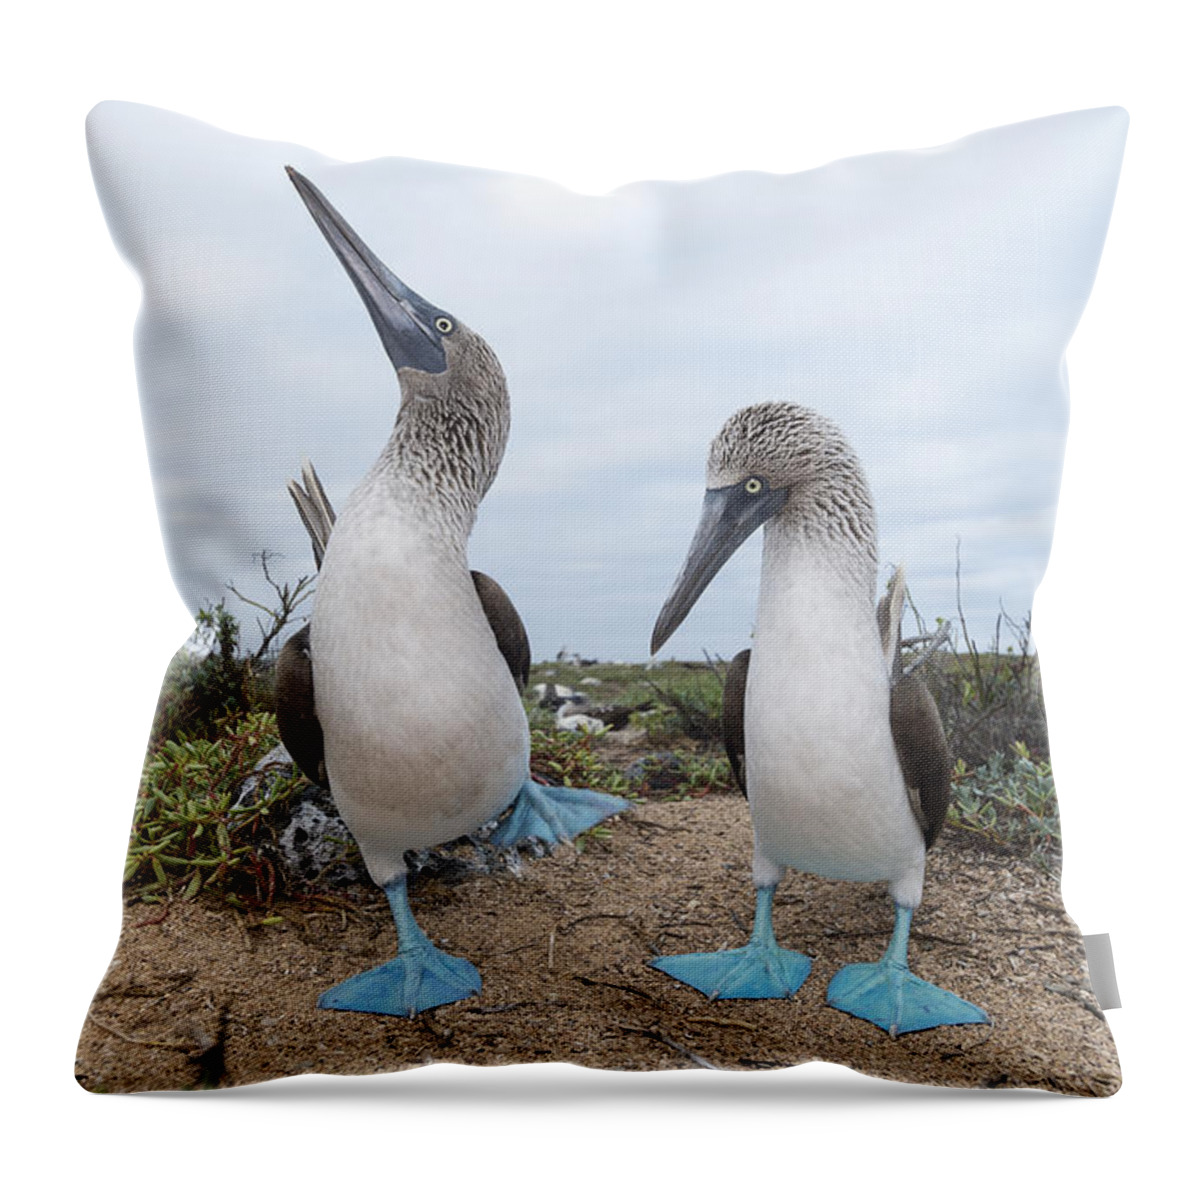 531676 Throw Pillow featuring the photograph Blue-footed Booby Courtship Dance by Tui De Roy